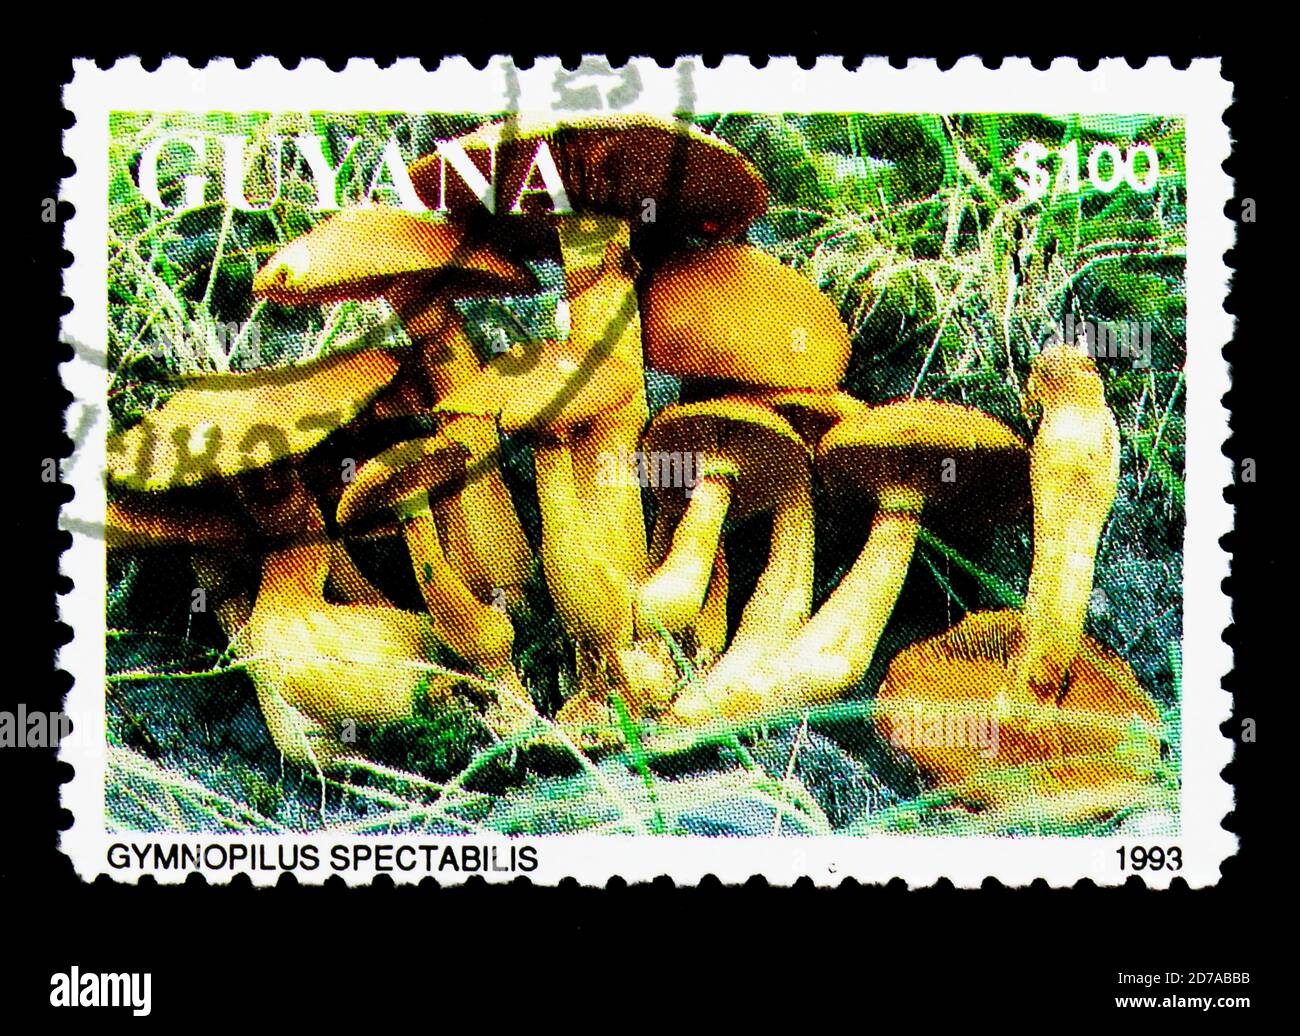 MOSCOW, RUSSIA - NOVEMBER 26, 2017: A stamp printed in Guyana shows Gymnopilus spectabilis, Mushrooms serie, circa 1993 Stock Photo